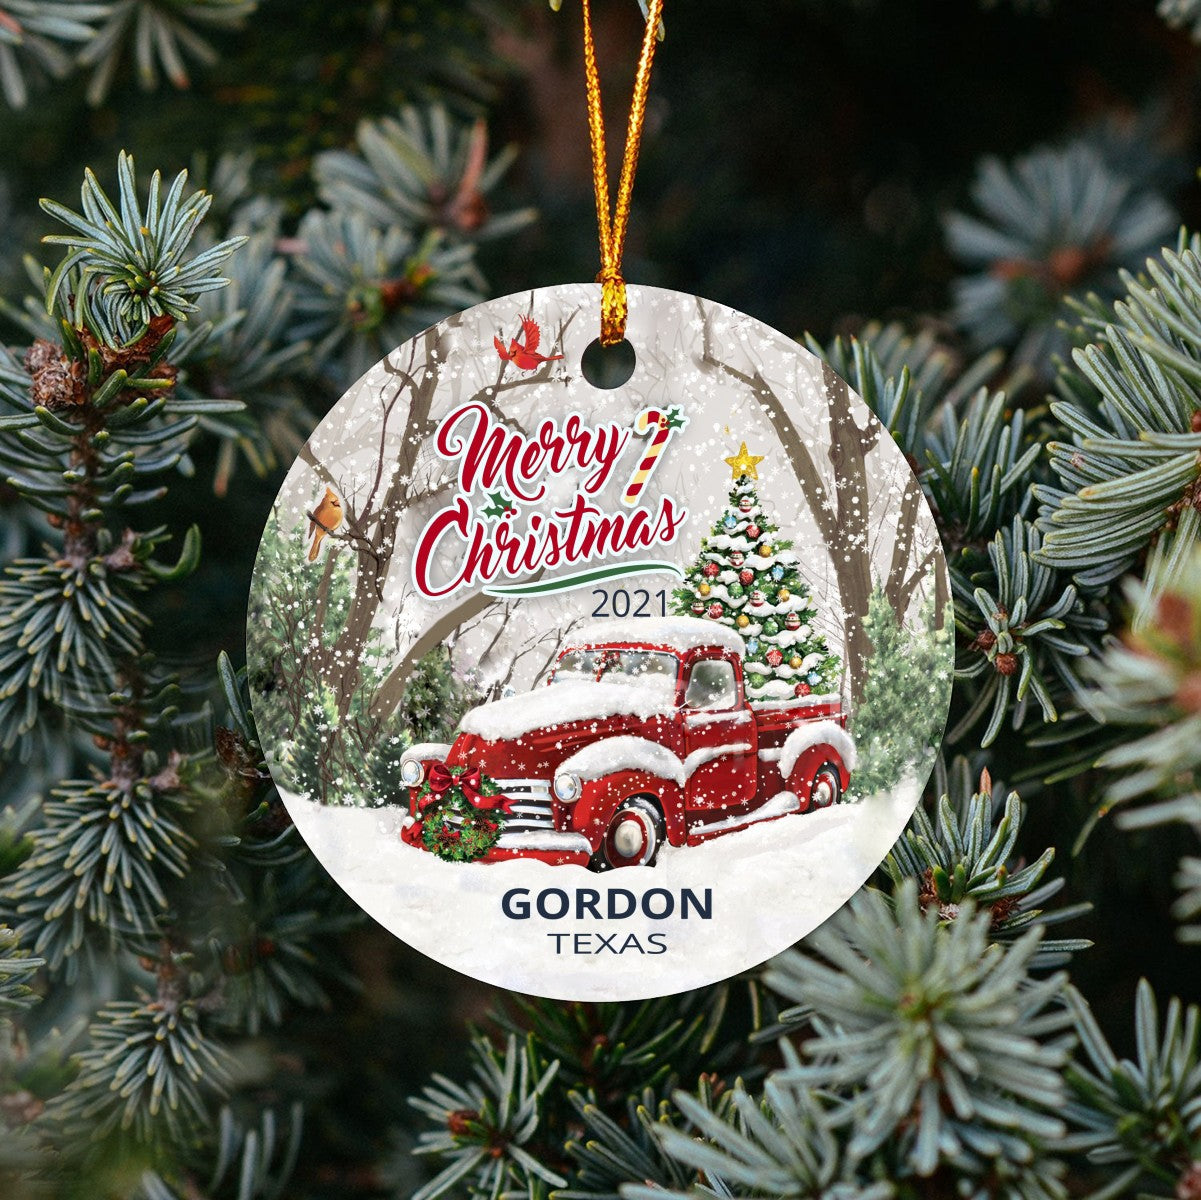 Christmas Tree Ornaments Gordon - Ornament With Name City, State Gordon Texas TX Ornament - Red Truck Xmas Ornaments 3'' Plastic Gift For Family, Friend And Housewarming